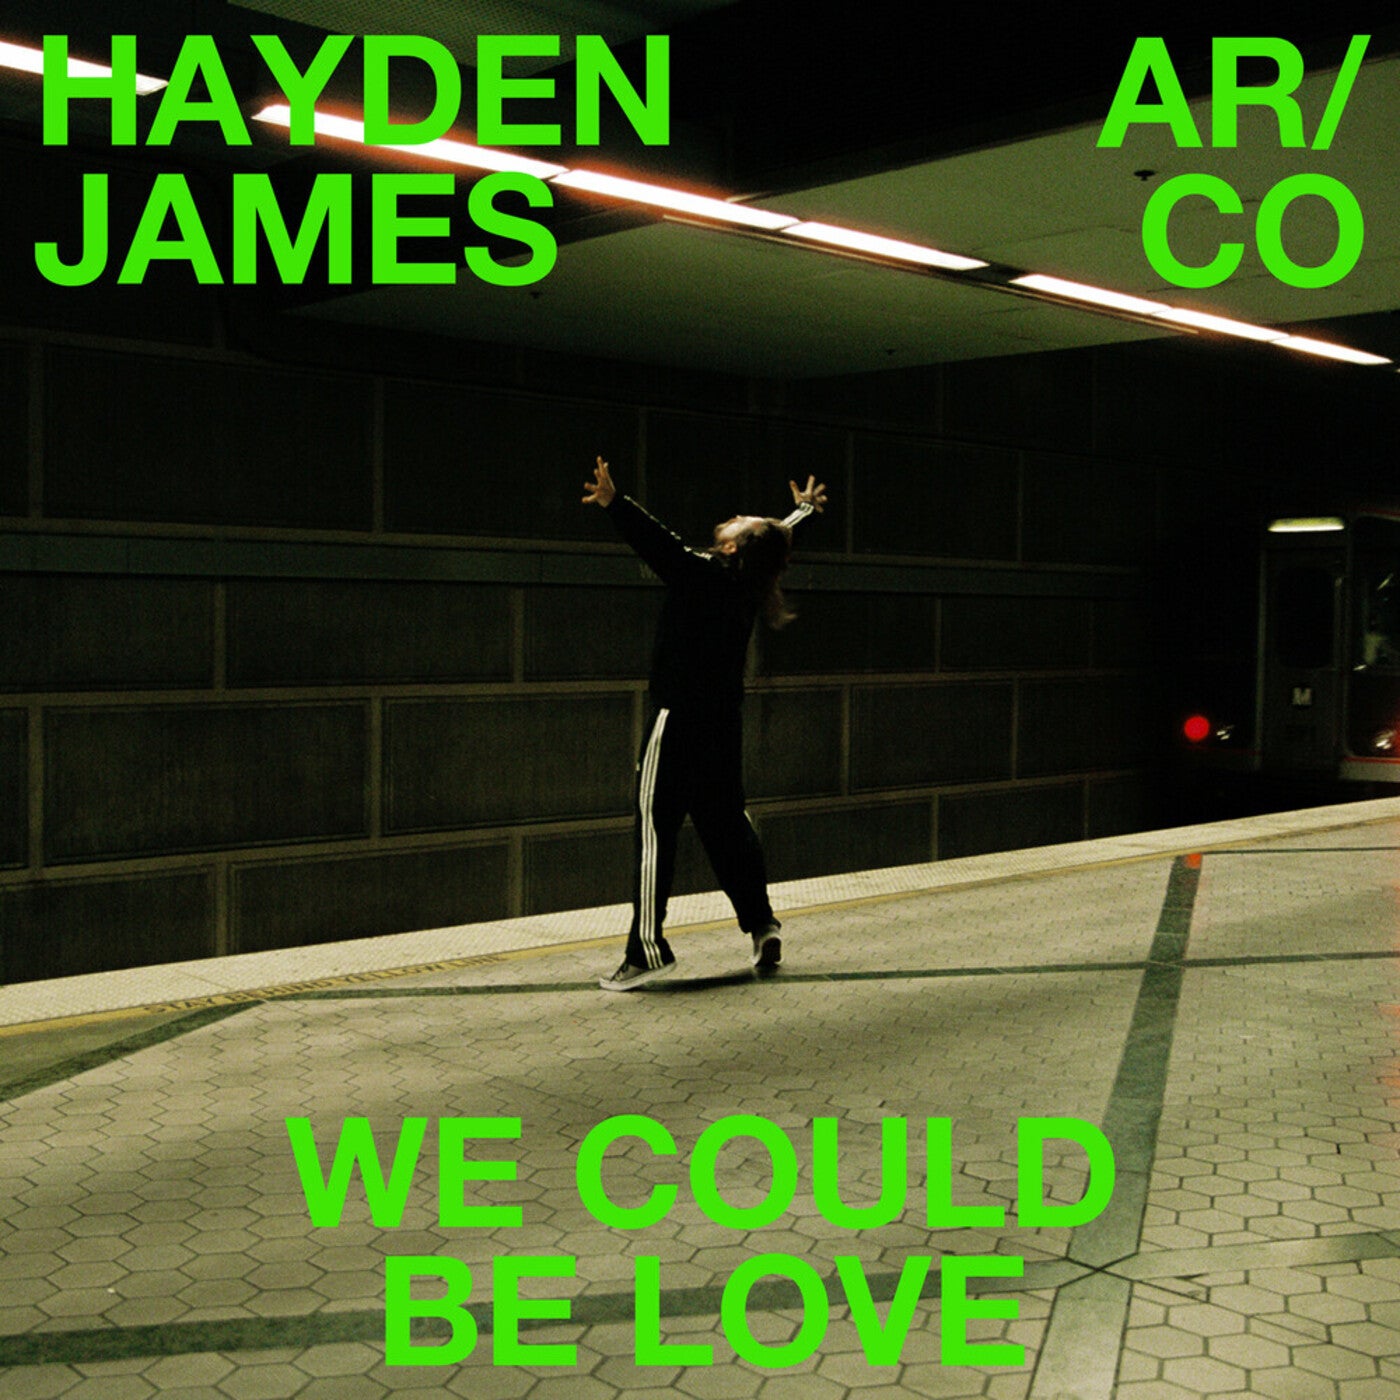 Hayden James, AR/CO - We Could Be Love (Extended Mix)